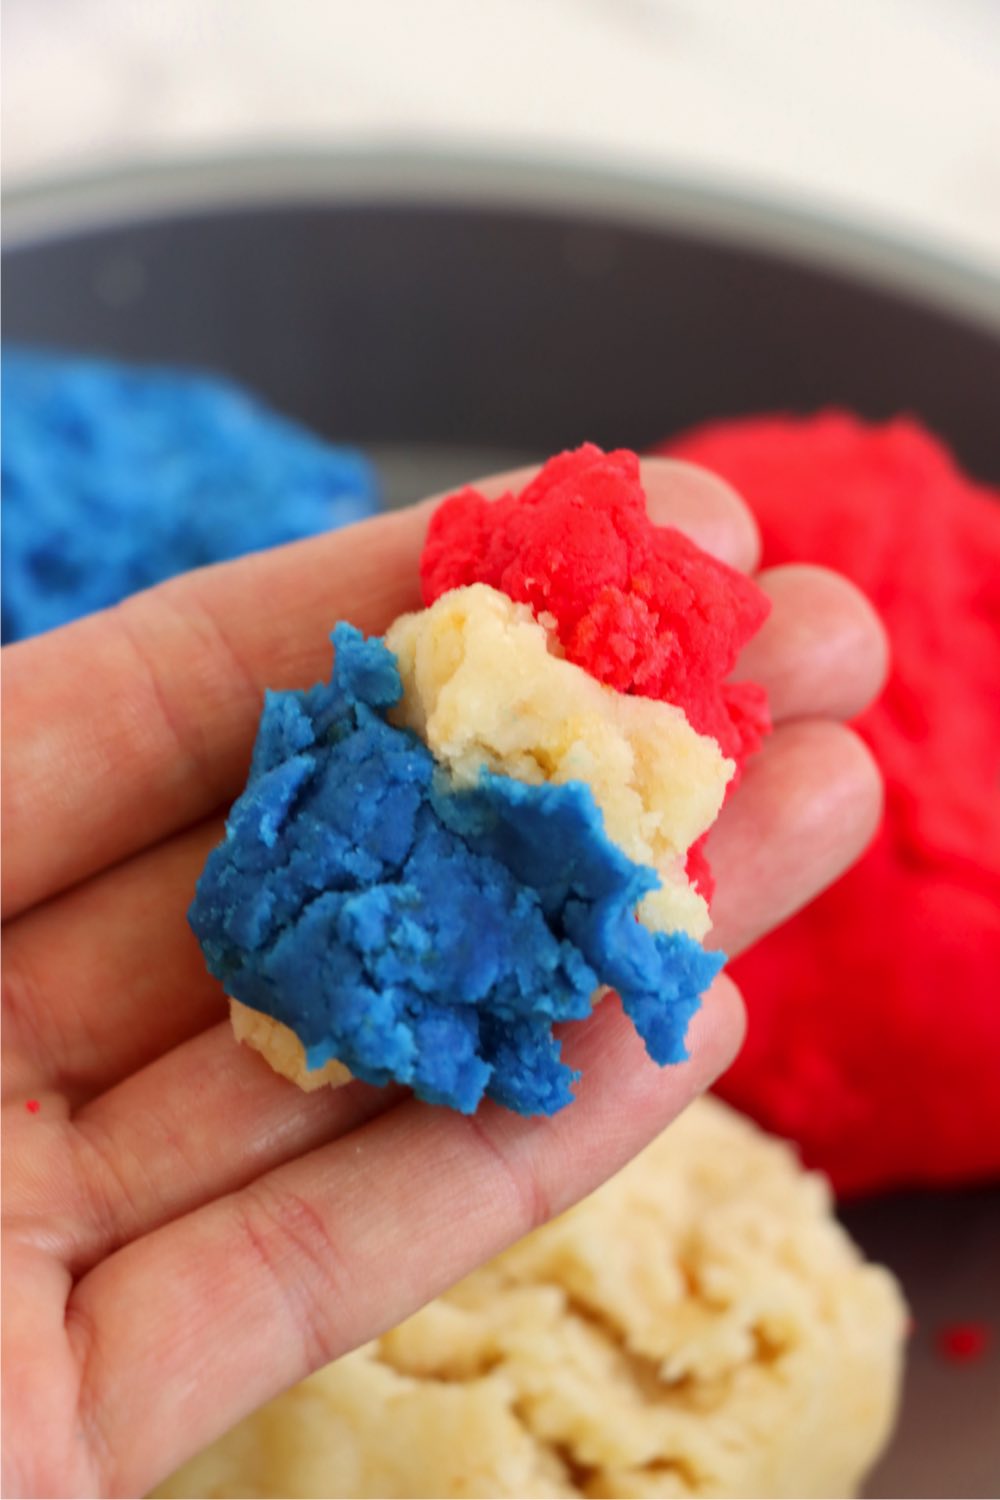 Hand holding red, white and blue cake batter.